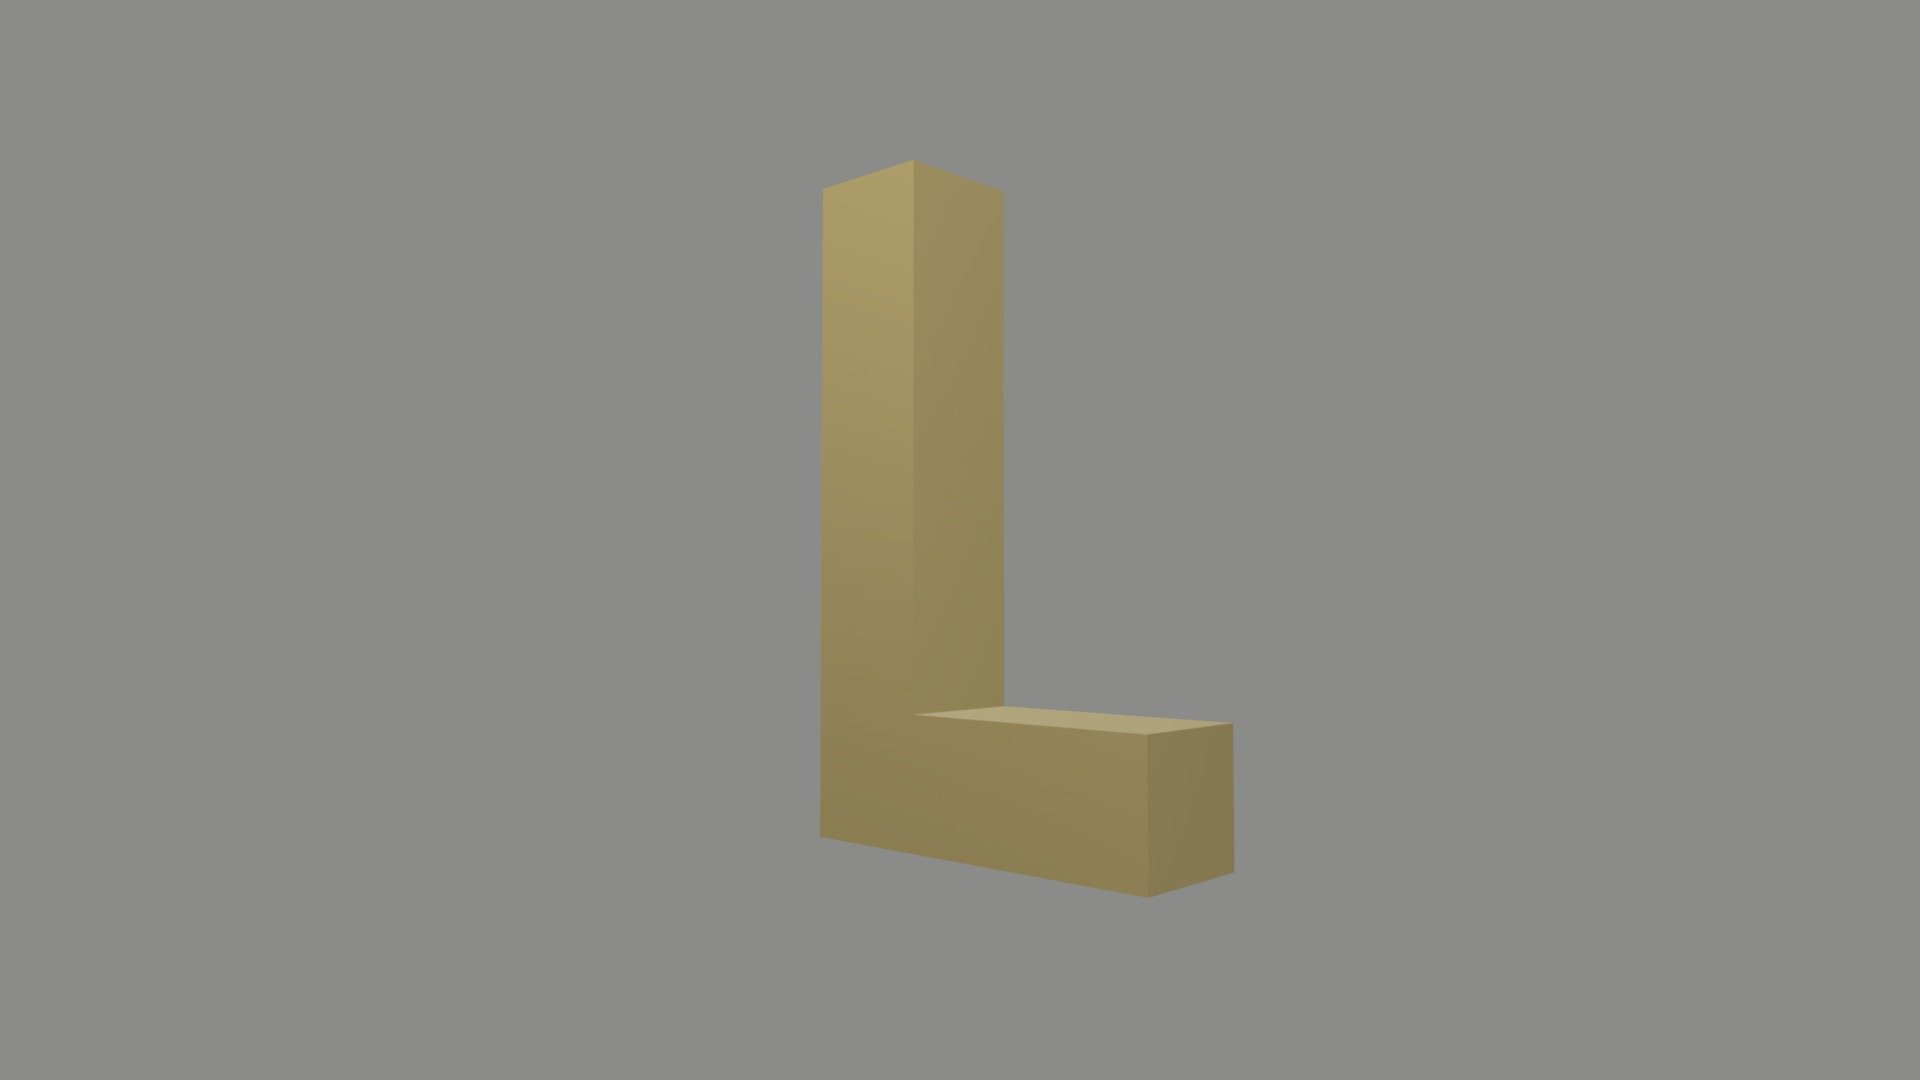 Created for Tech Lessons 4U.  Visit techlessons4u.com - Letter L - Download Free 3D model by Keith.Pearey 3d model